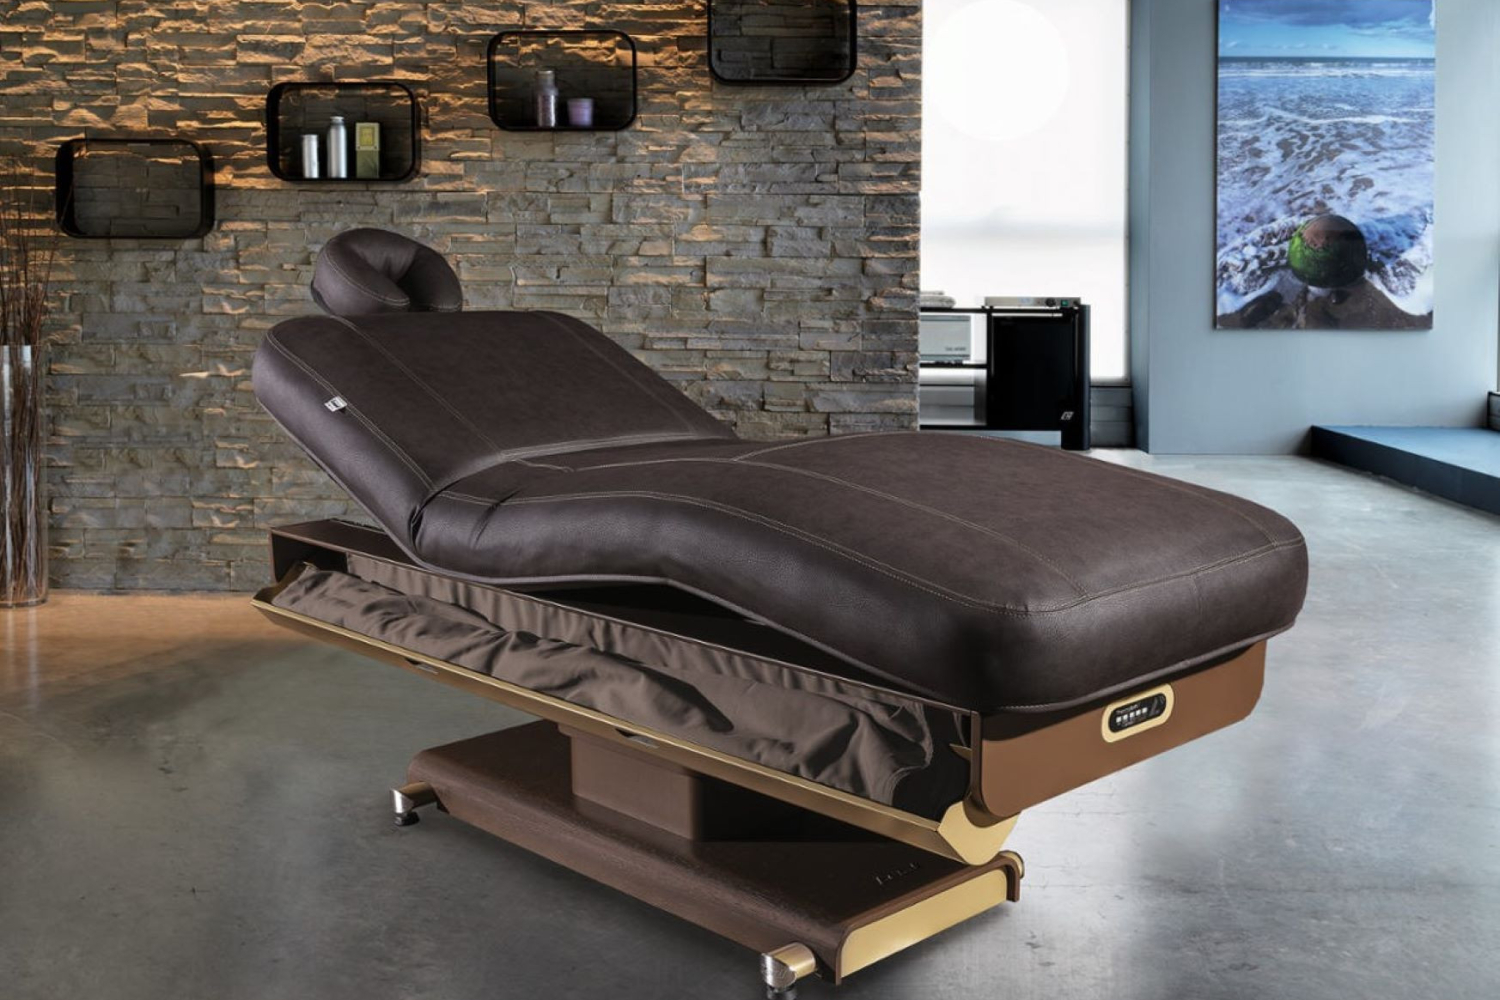 Lemi Launches ThermoSoft-V treatment bed